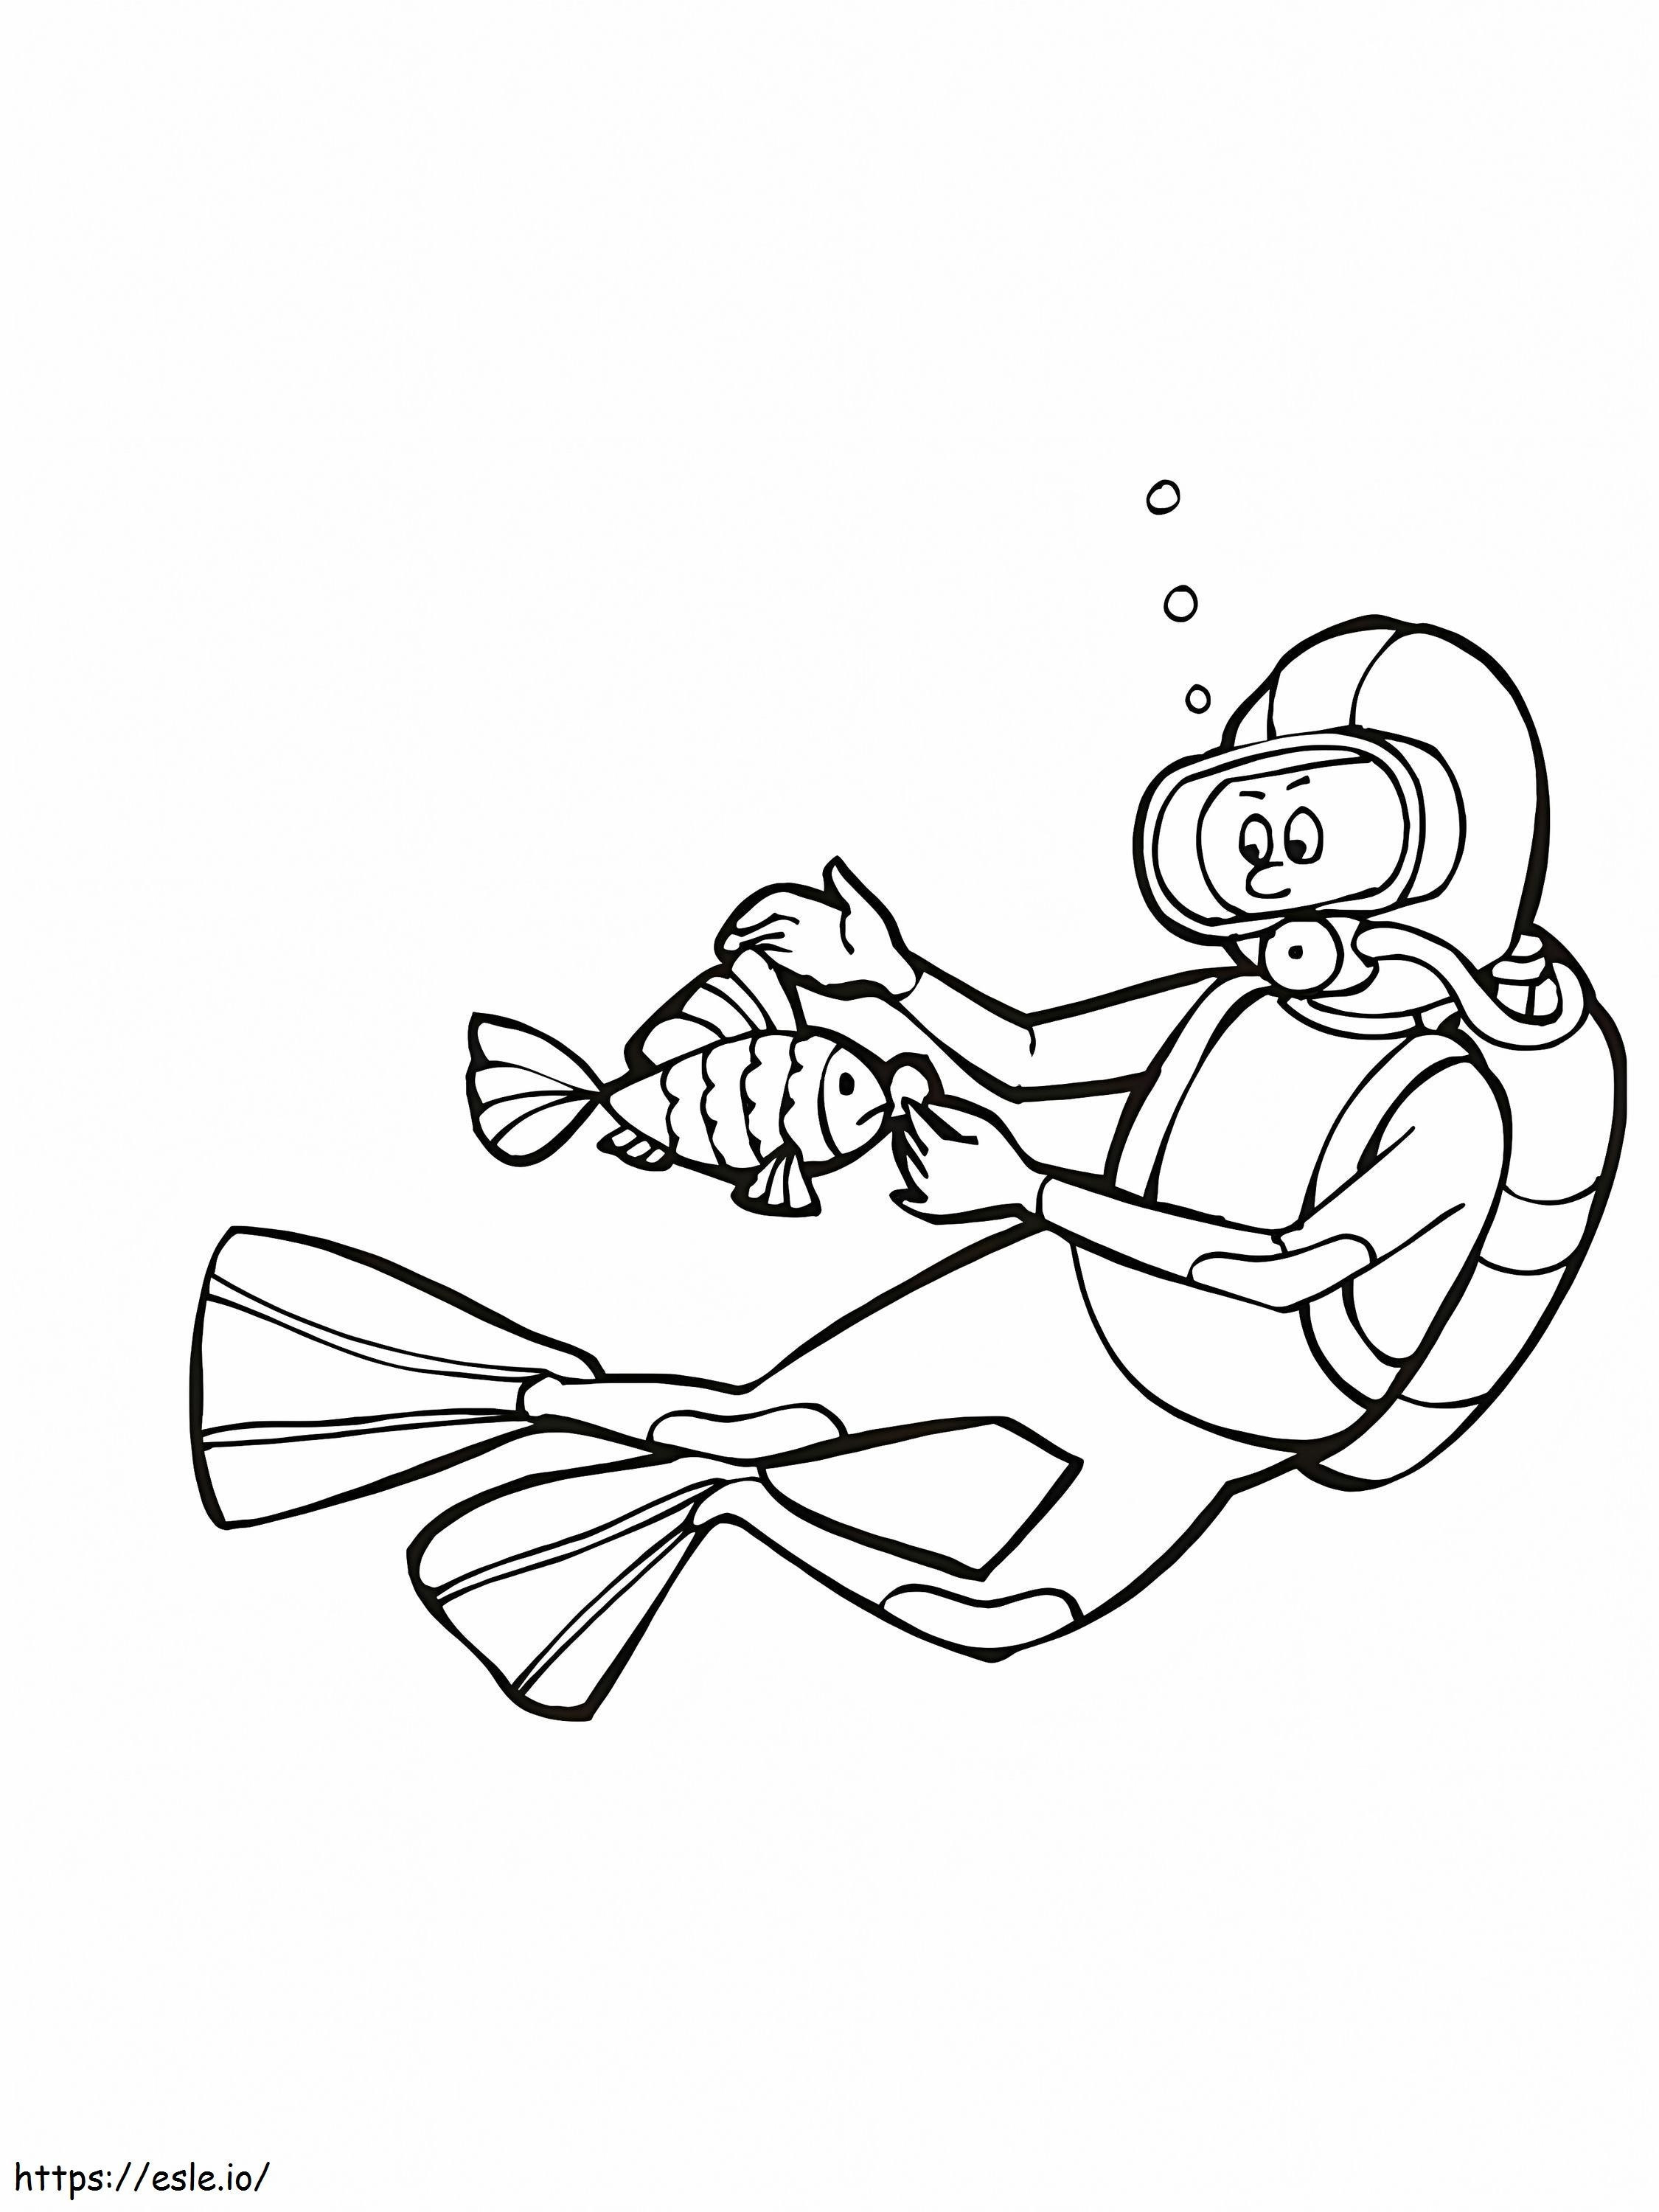 Scuba Diver And A Fish coloring page